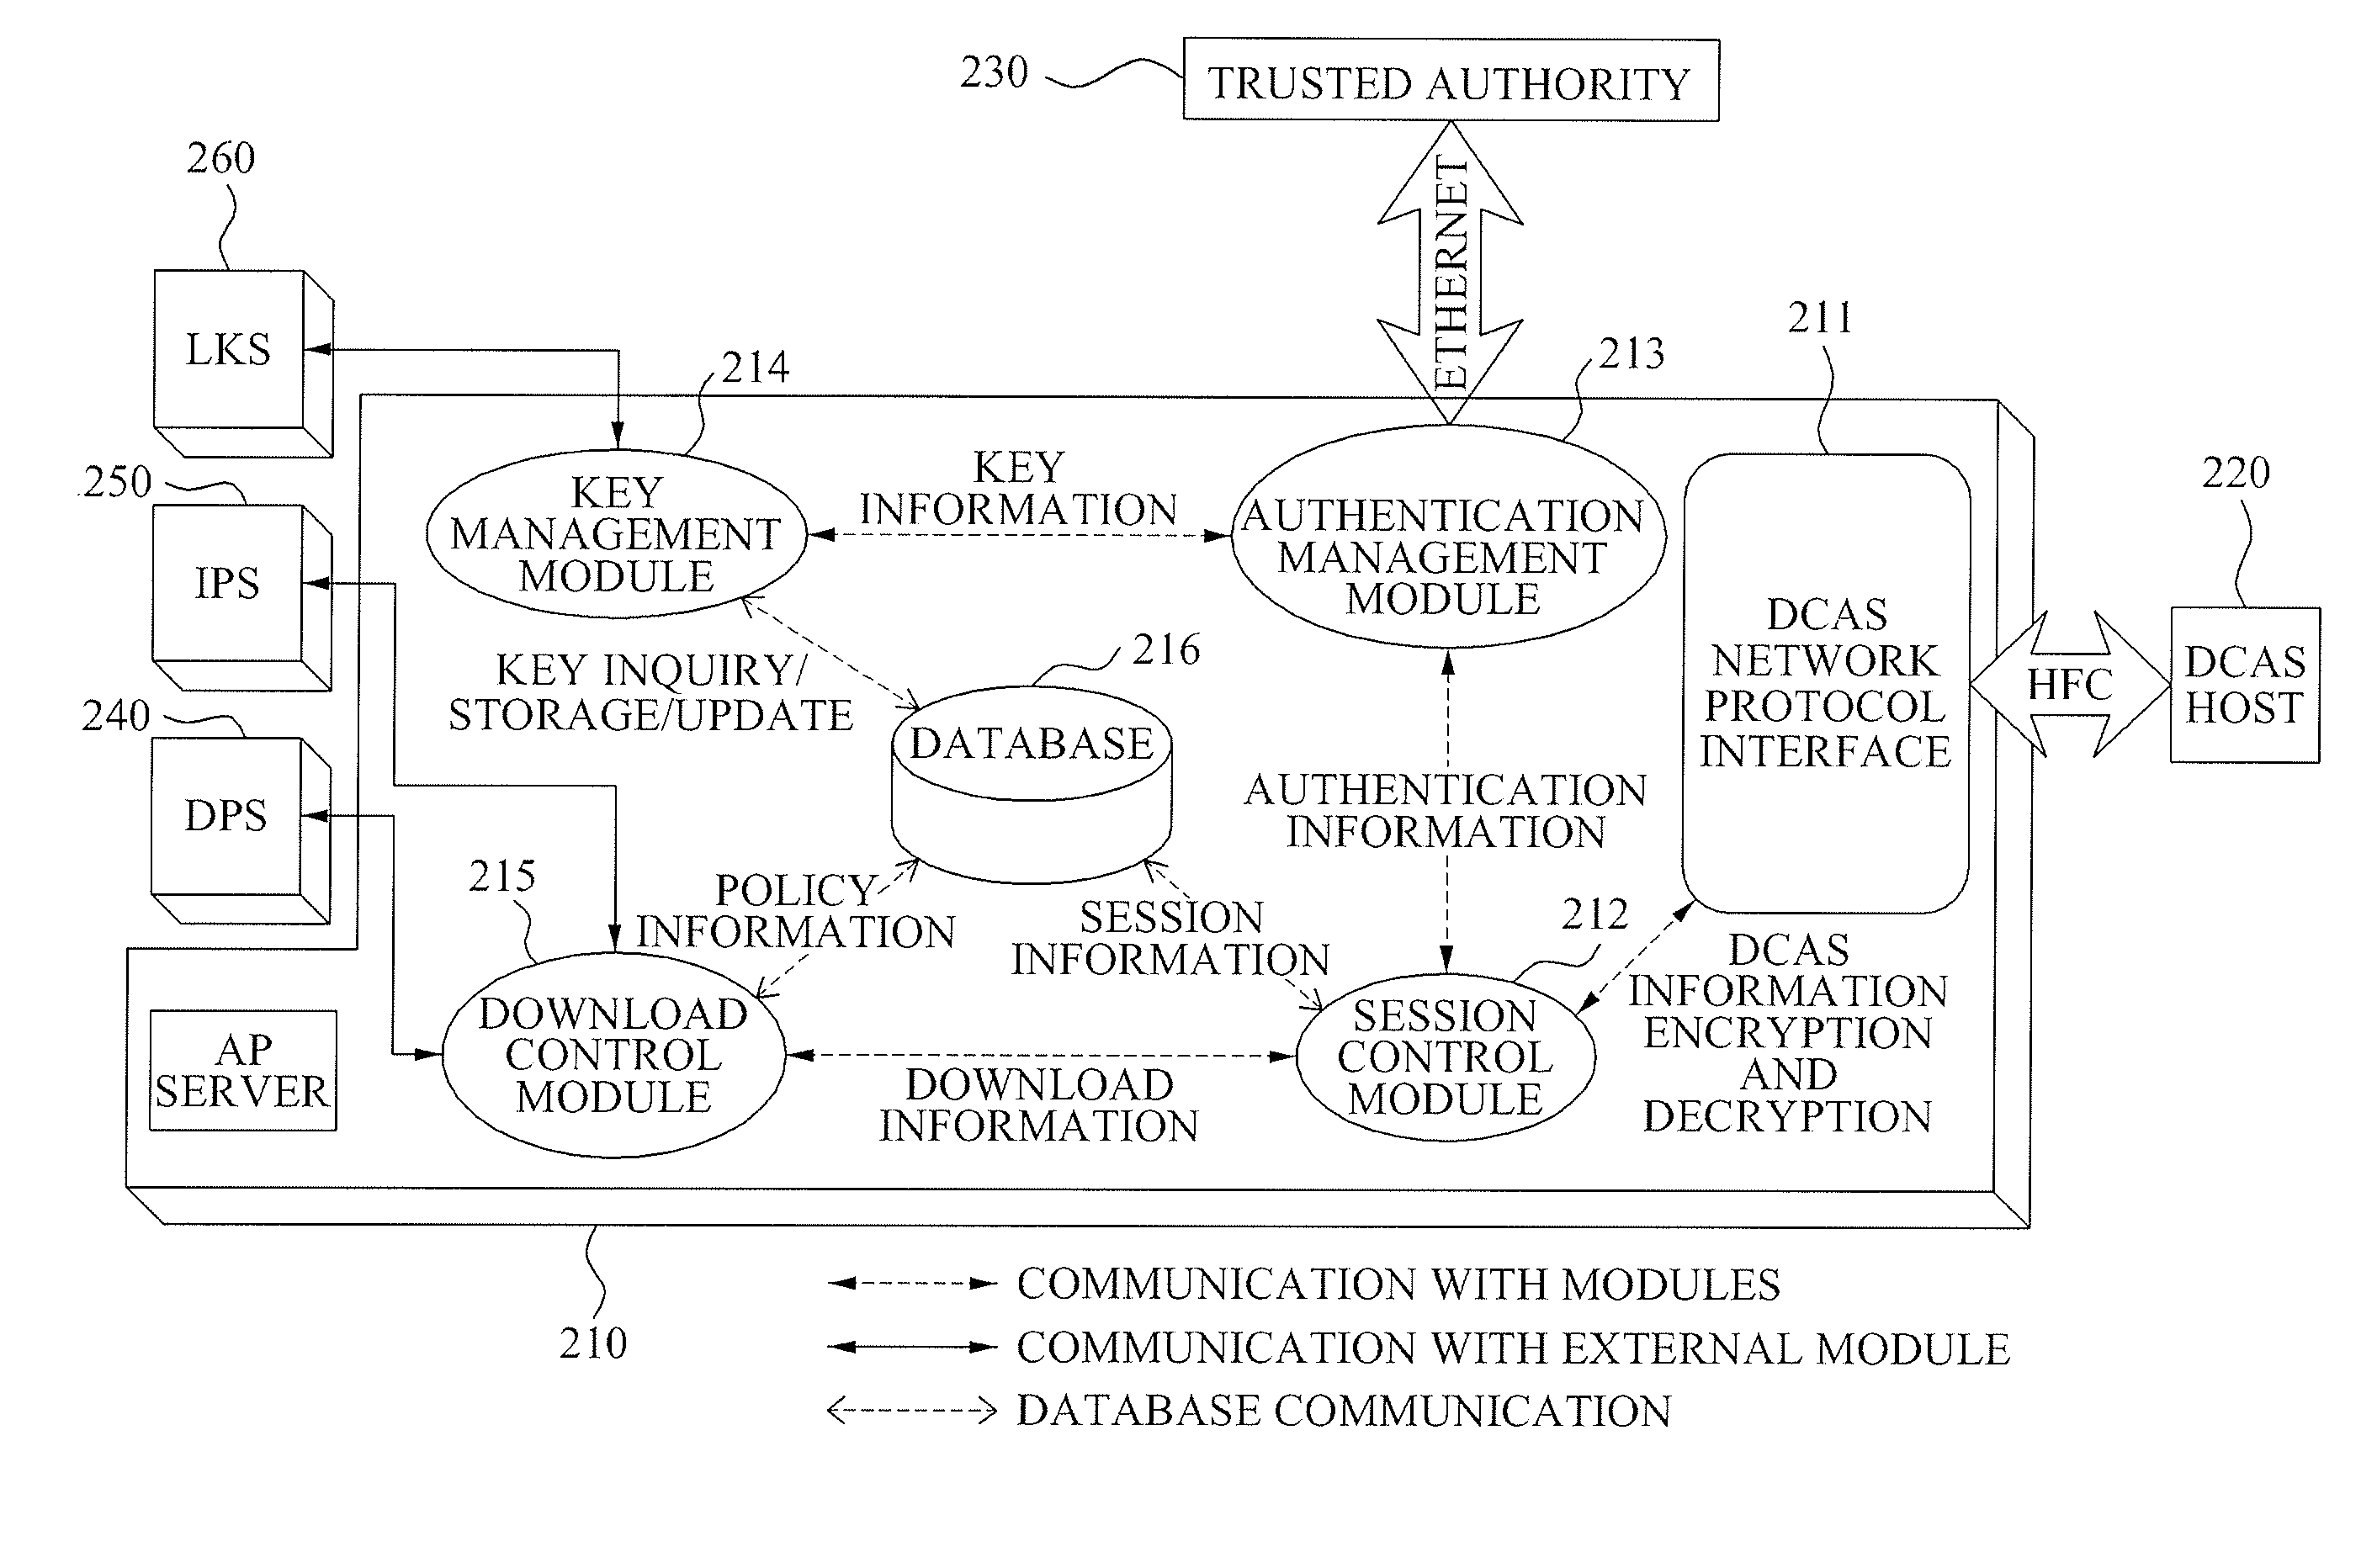 Headend system for downloadable conditional access service and method of operating the same